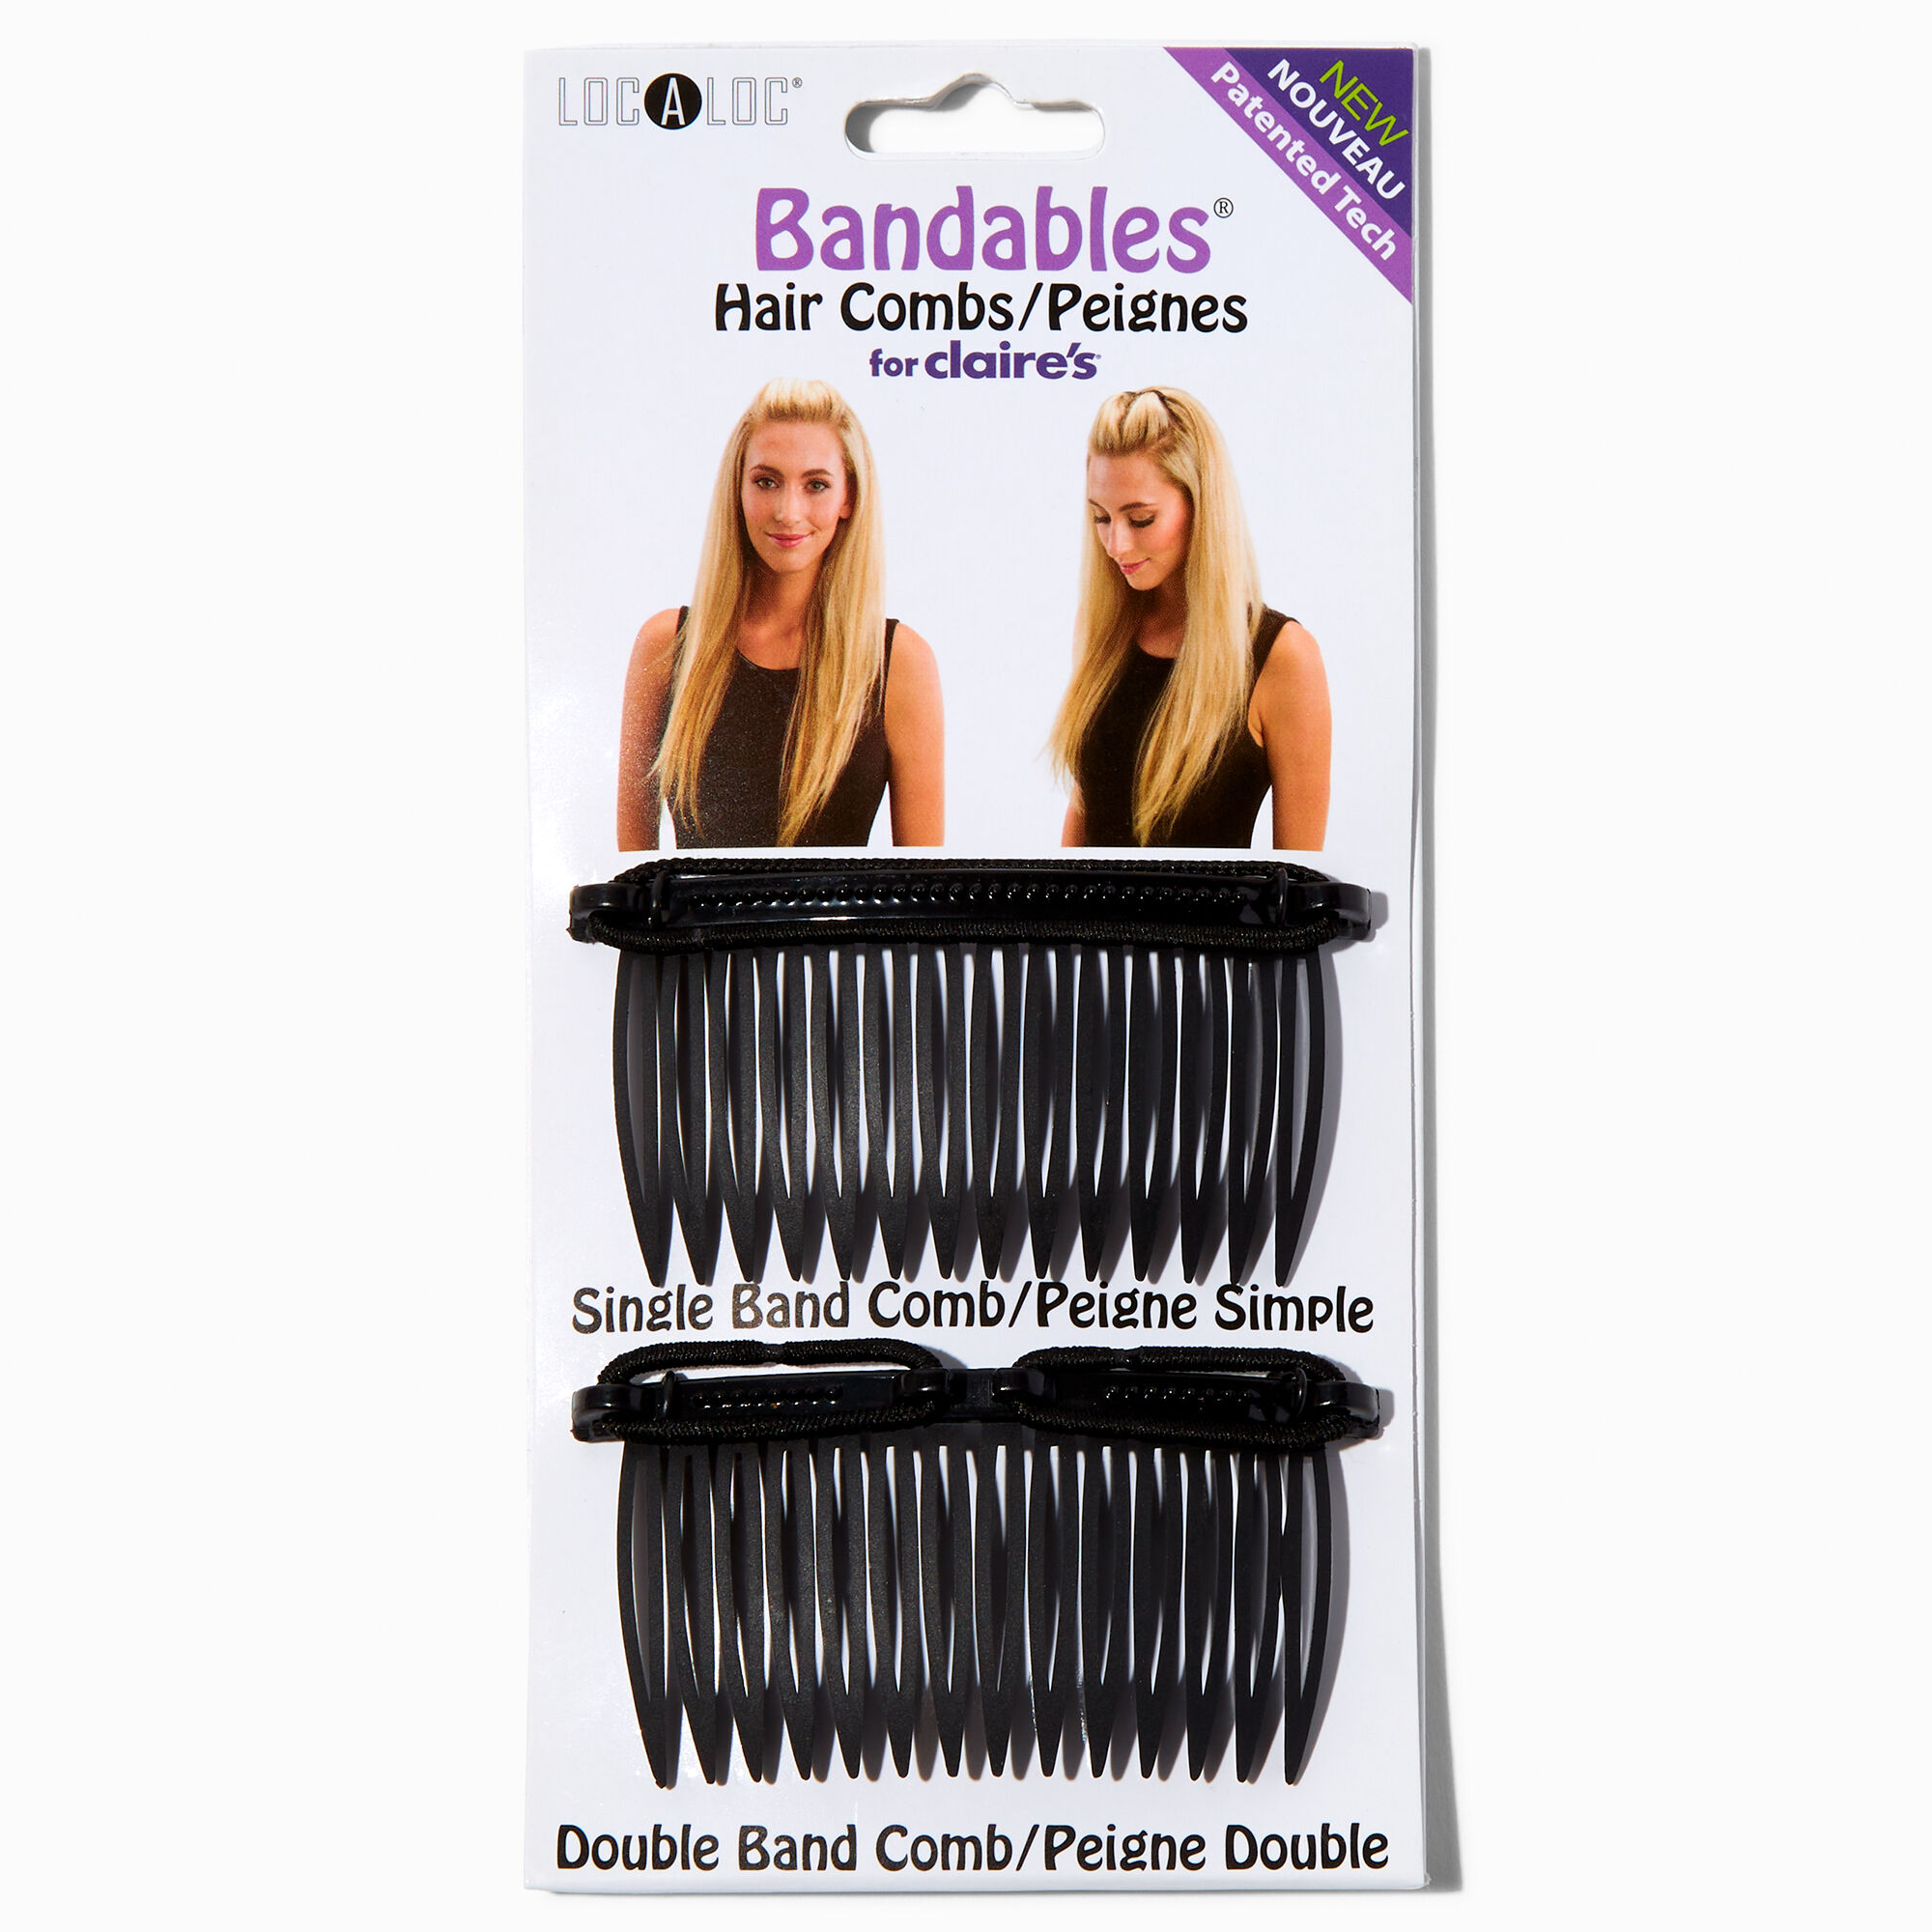 View Claires Localoc Bandables Hair Combs 2 Pack Black information